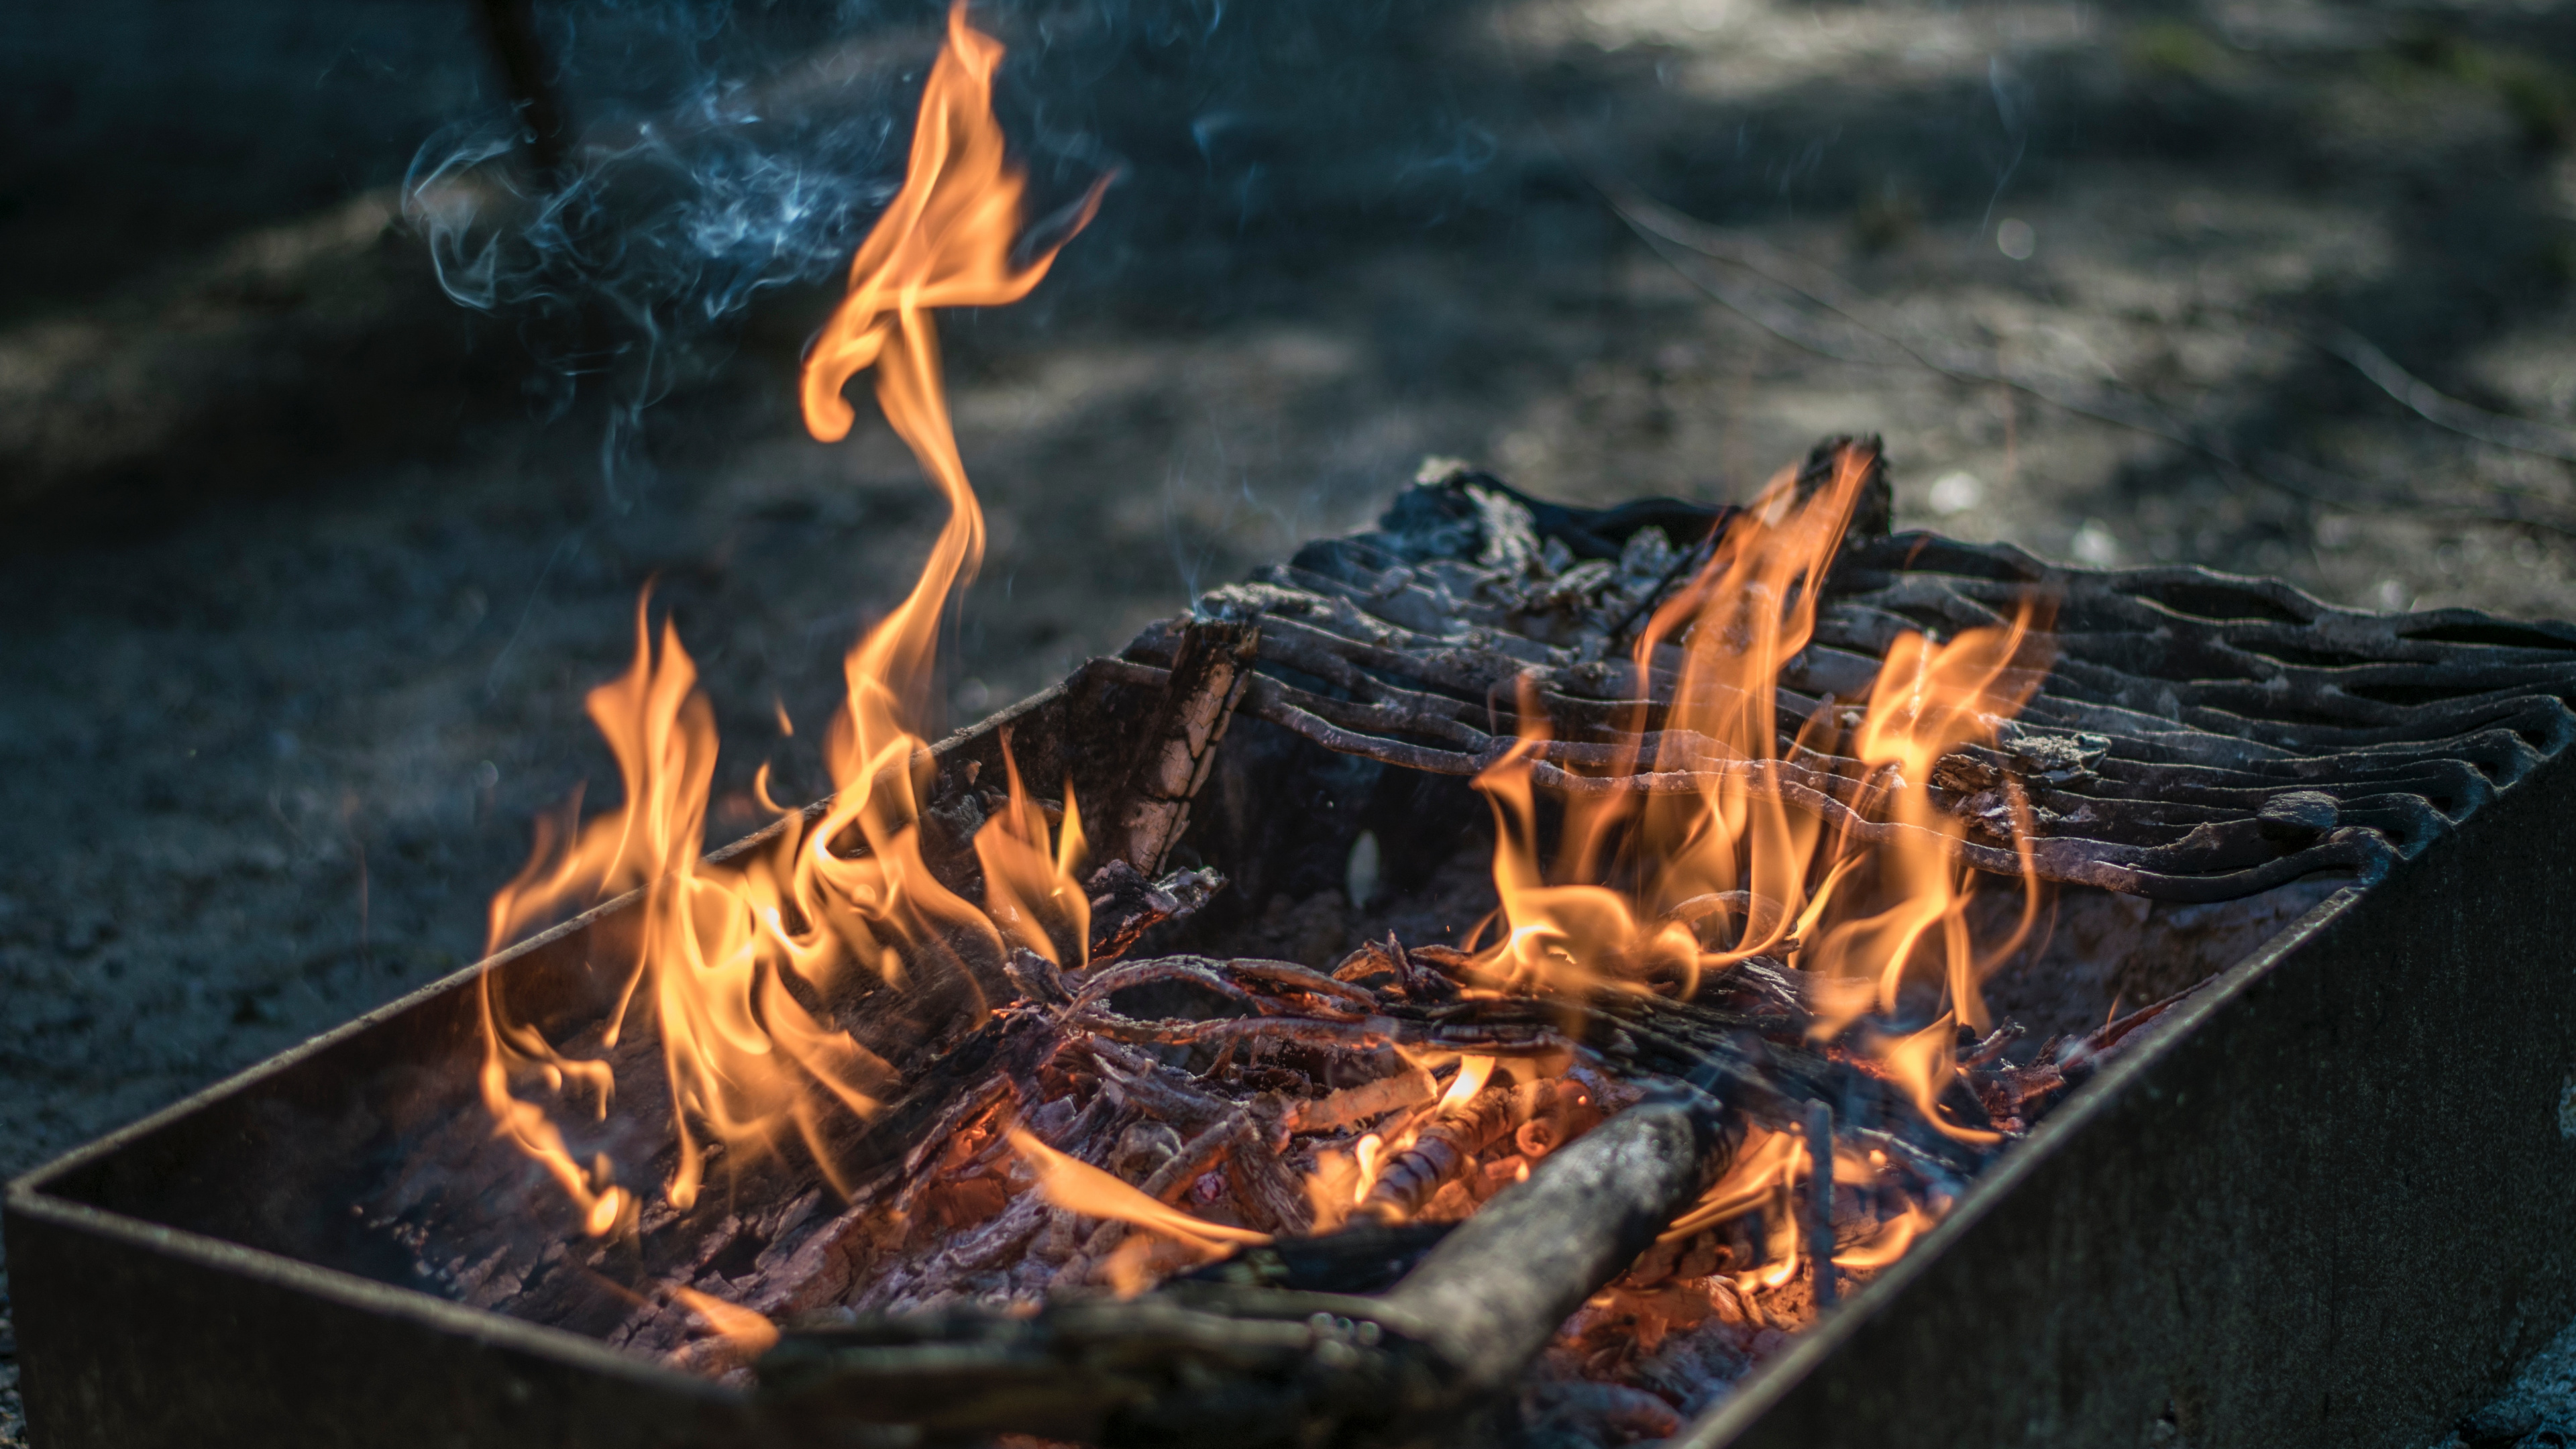 Burning Wood on Fire Pit. Wallpaper in 3840x2160 Resolution